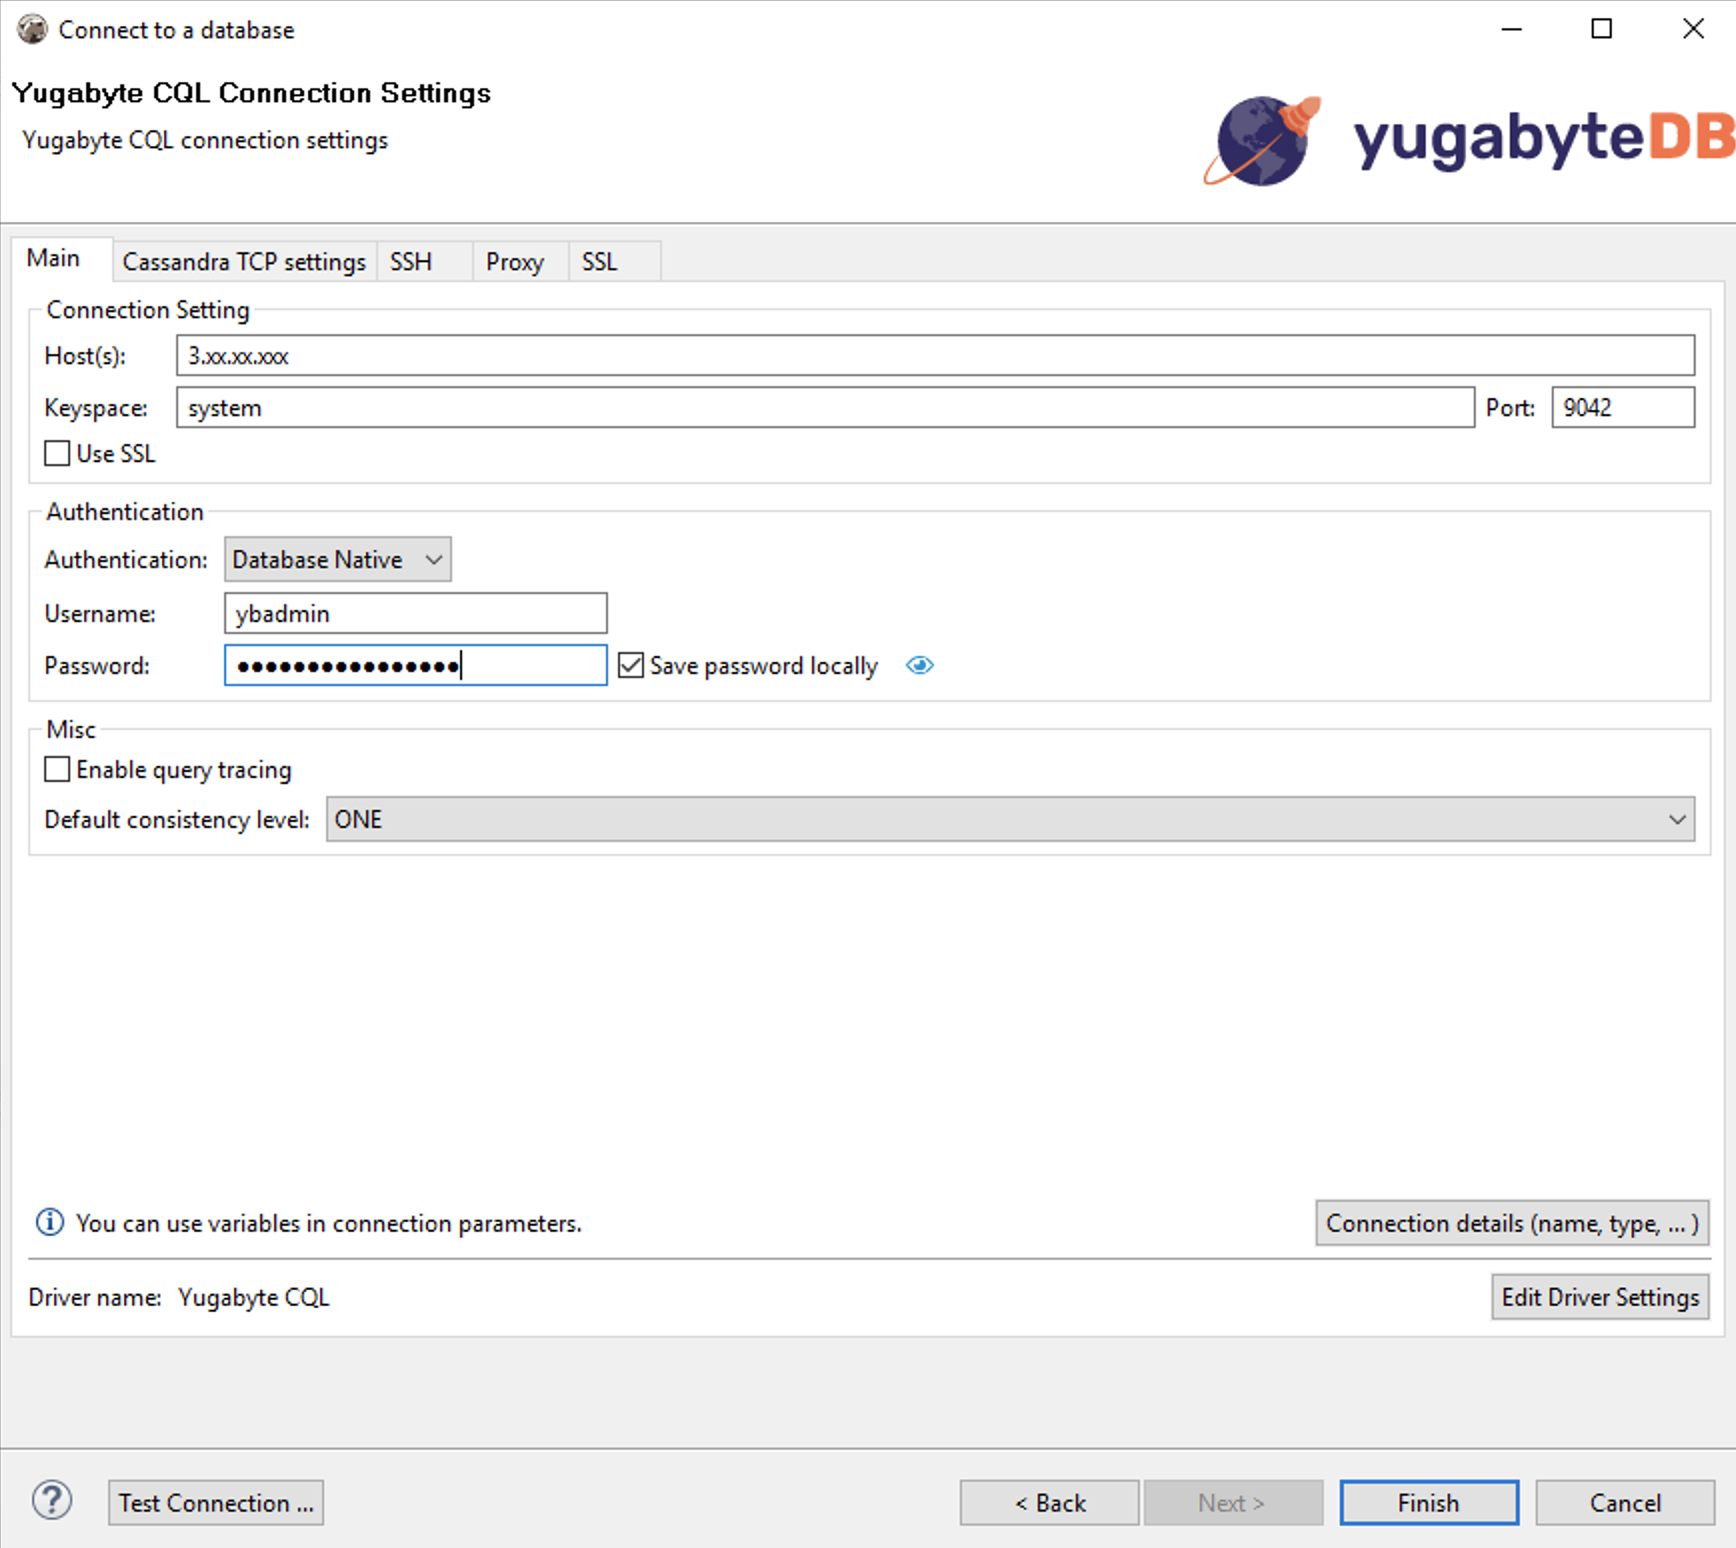 Creating a New Database Connection for Connecting to YugabyteDB Cluster